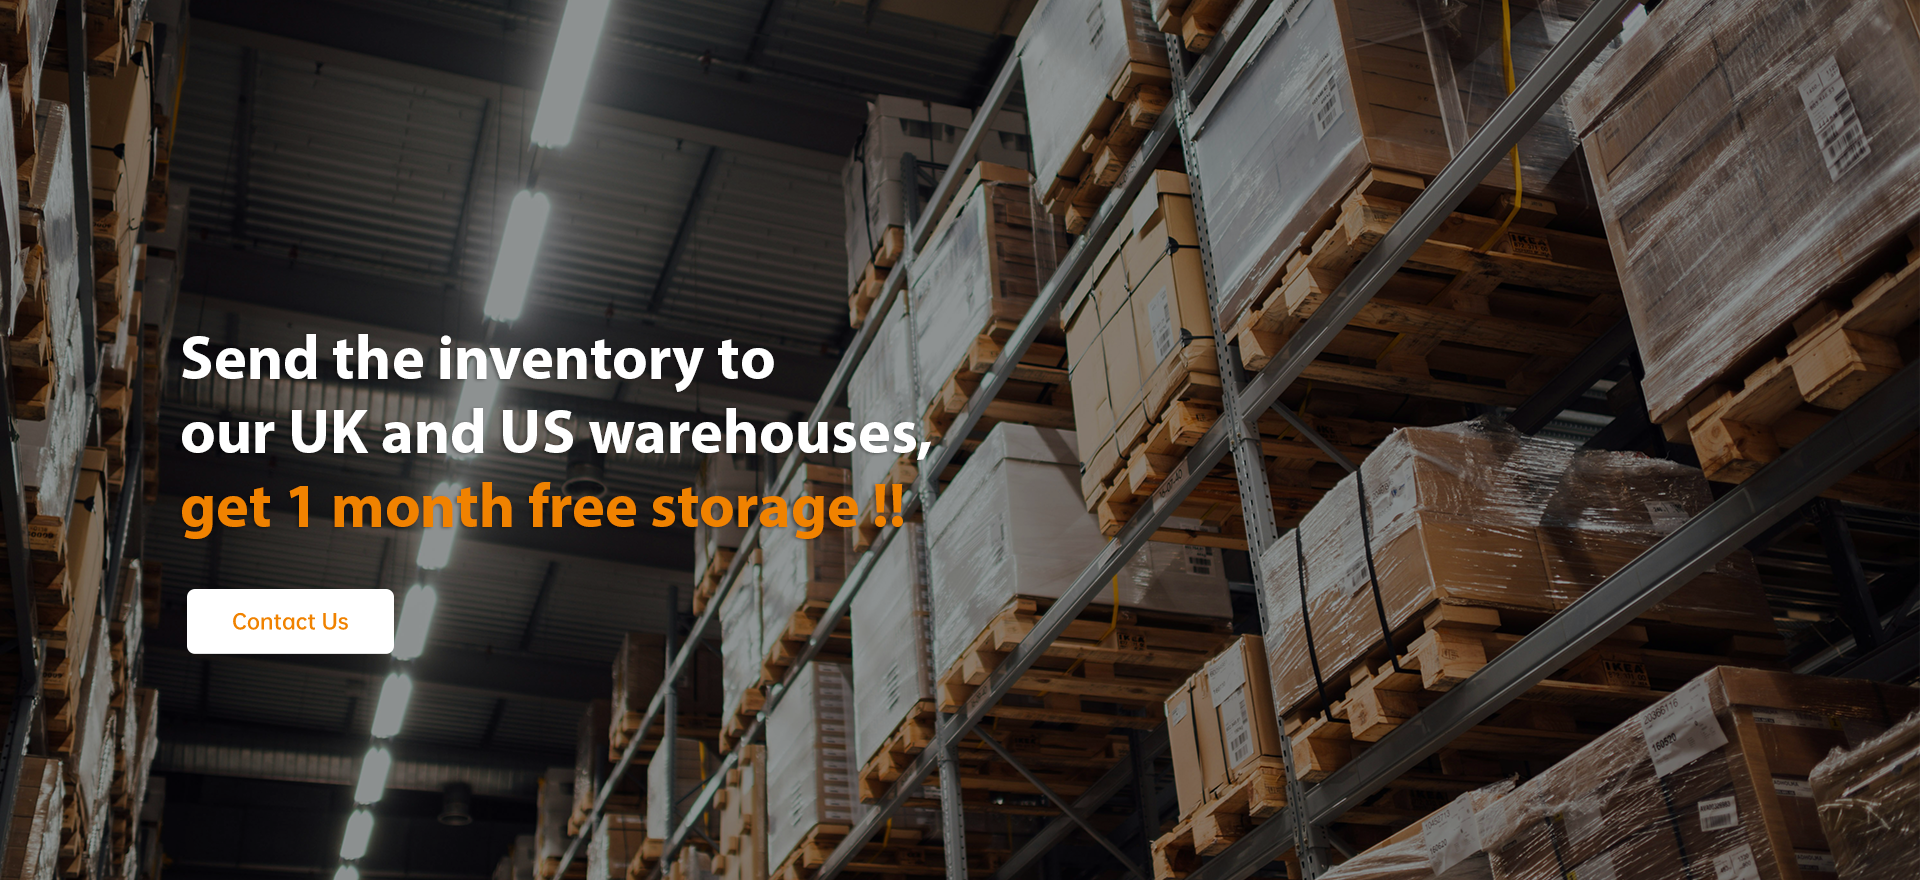 Let us ship your goods to our warehouse in the UK or US and get 1 month free storage.